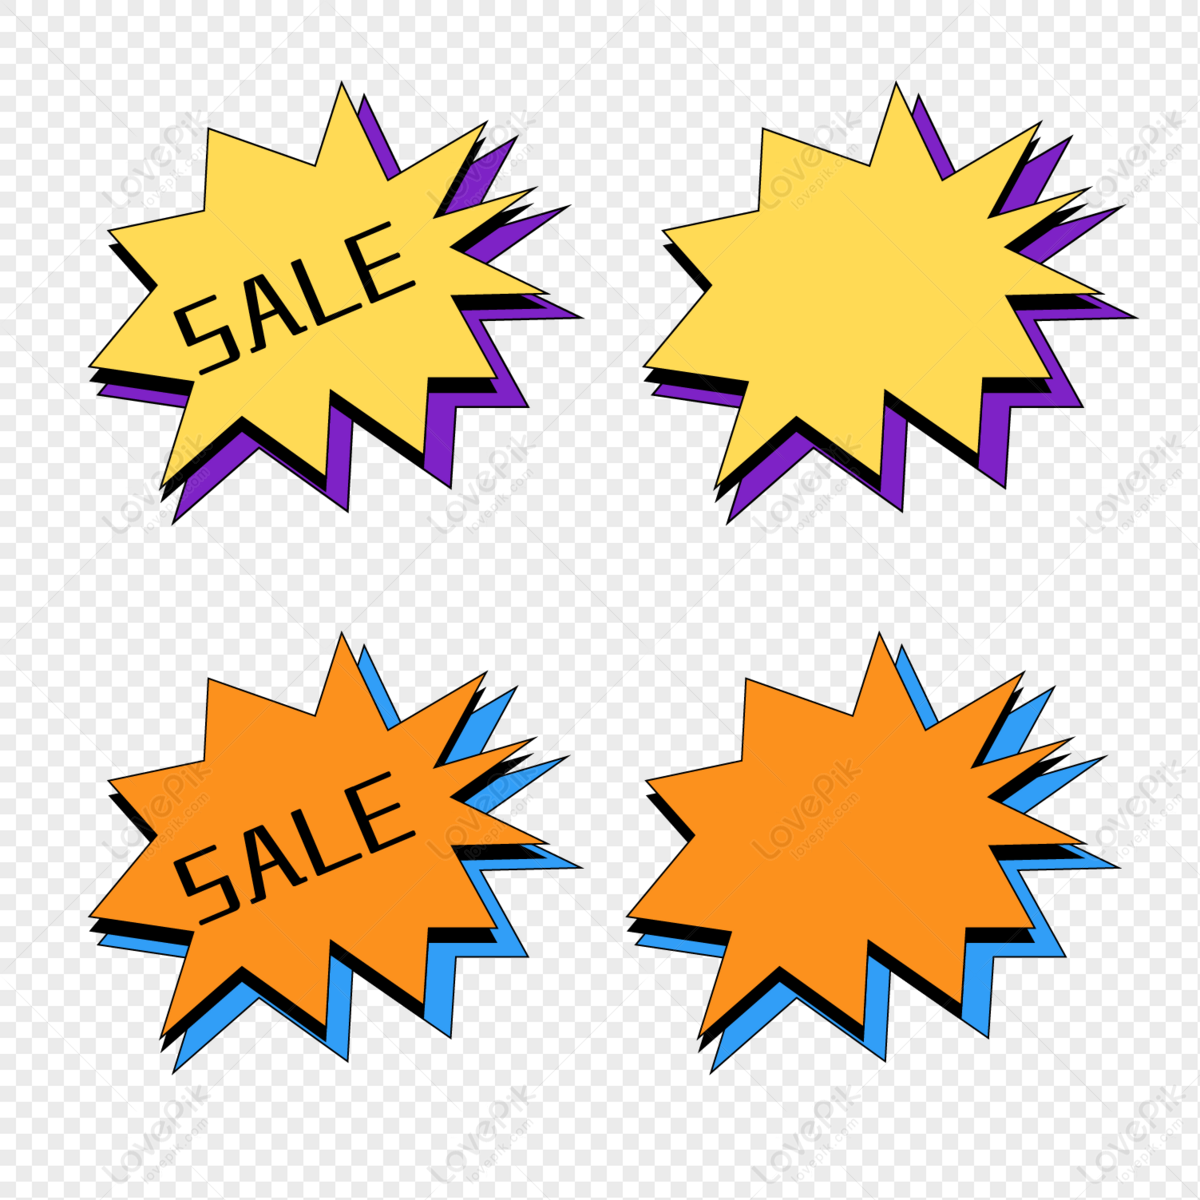 Season Sale Label PNG Clipart Image​  Gallery Yopriceville - High-Quality  Free Images and Transparent PNG Clipart